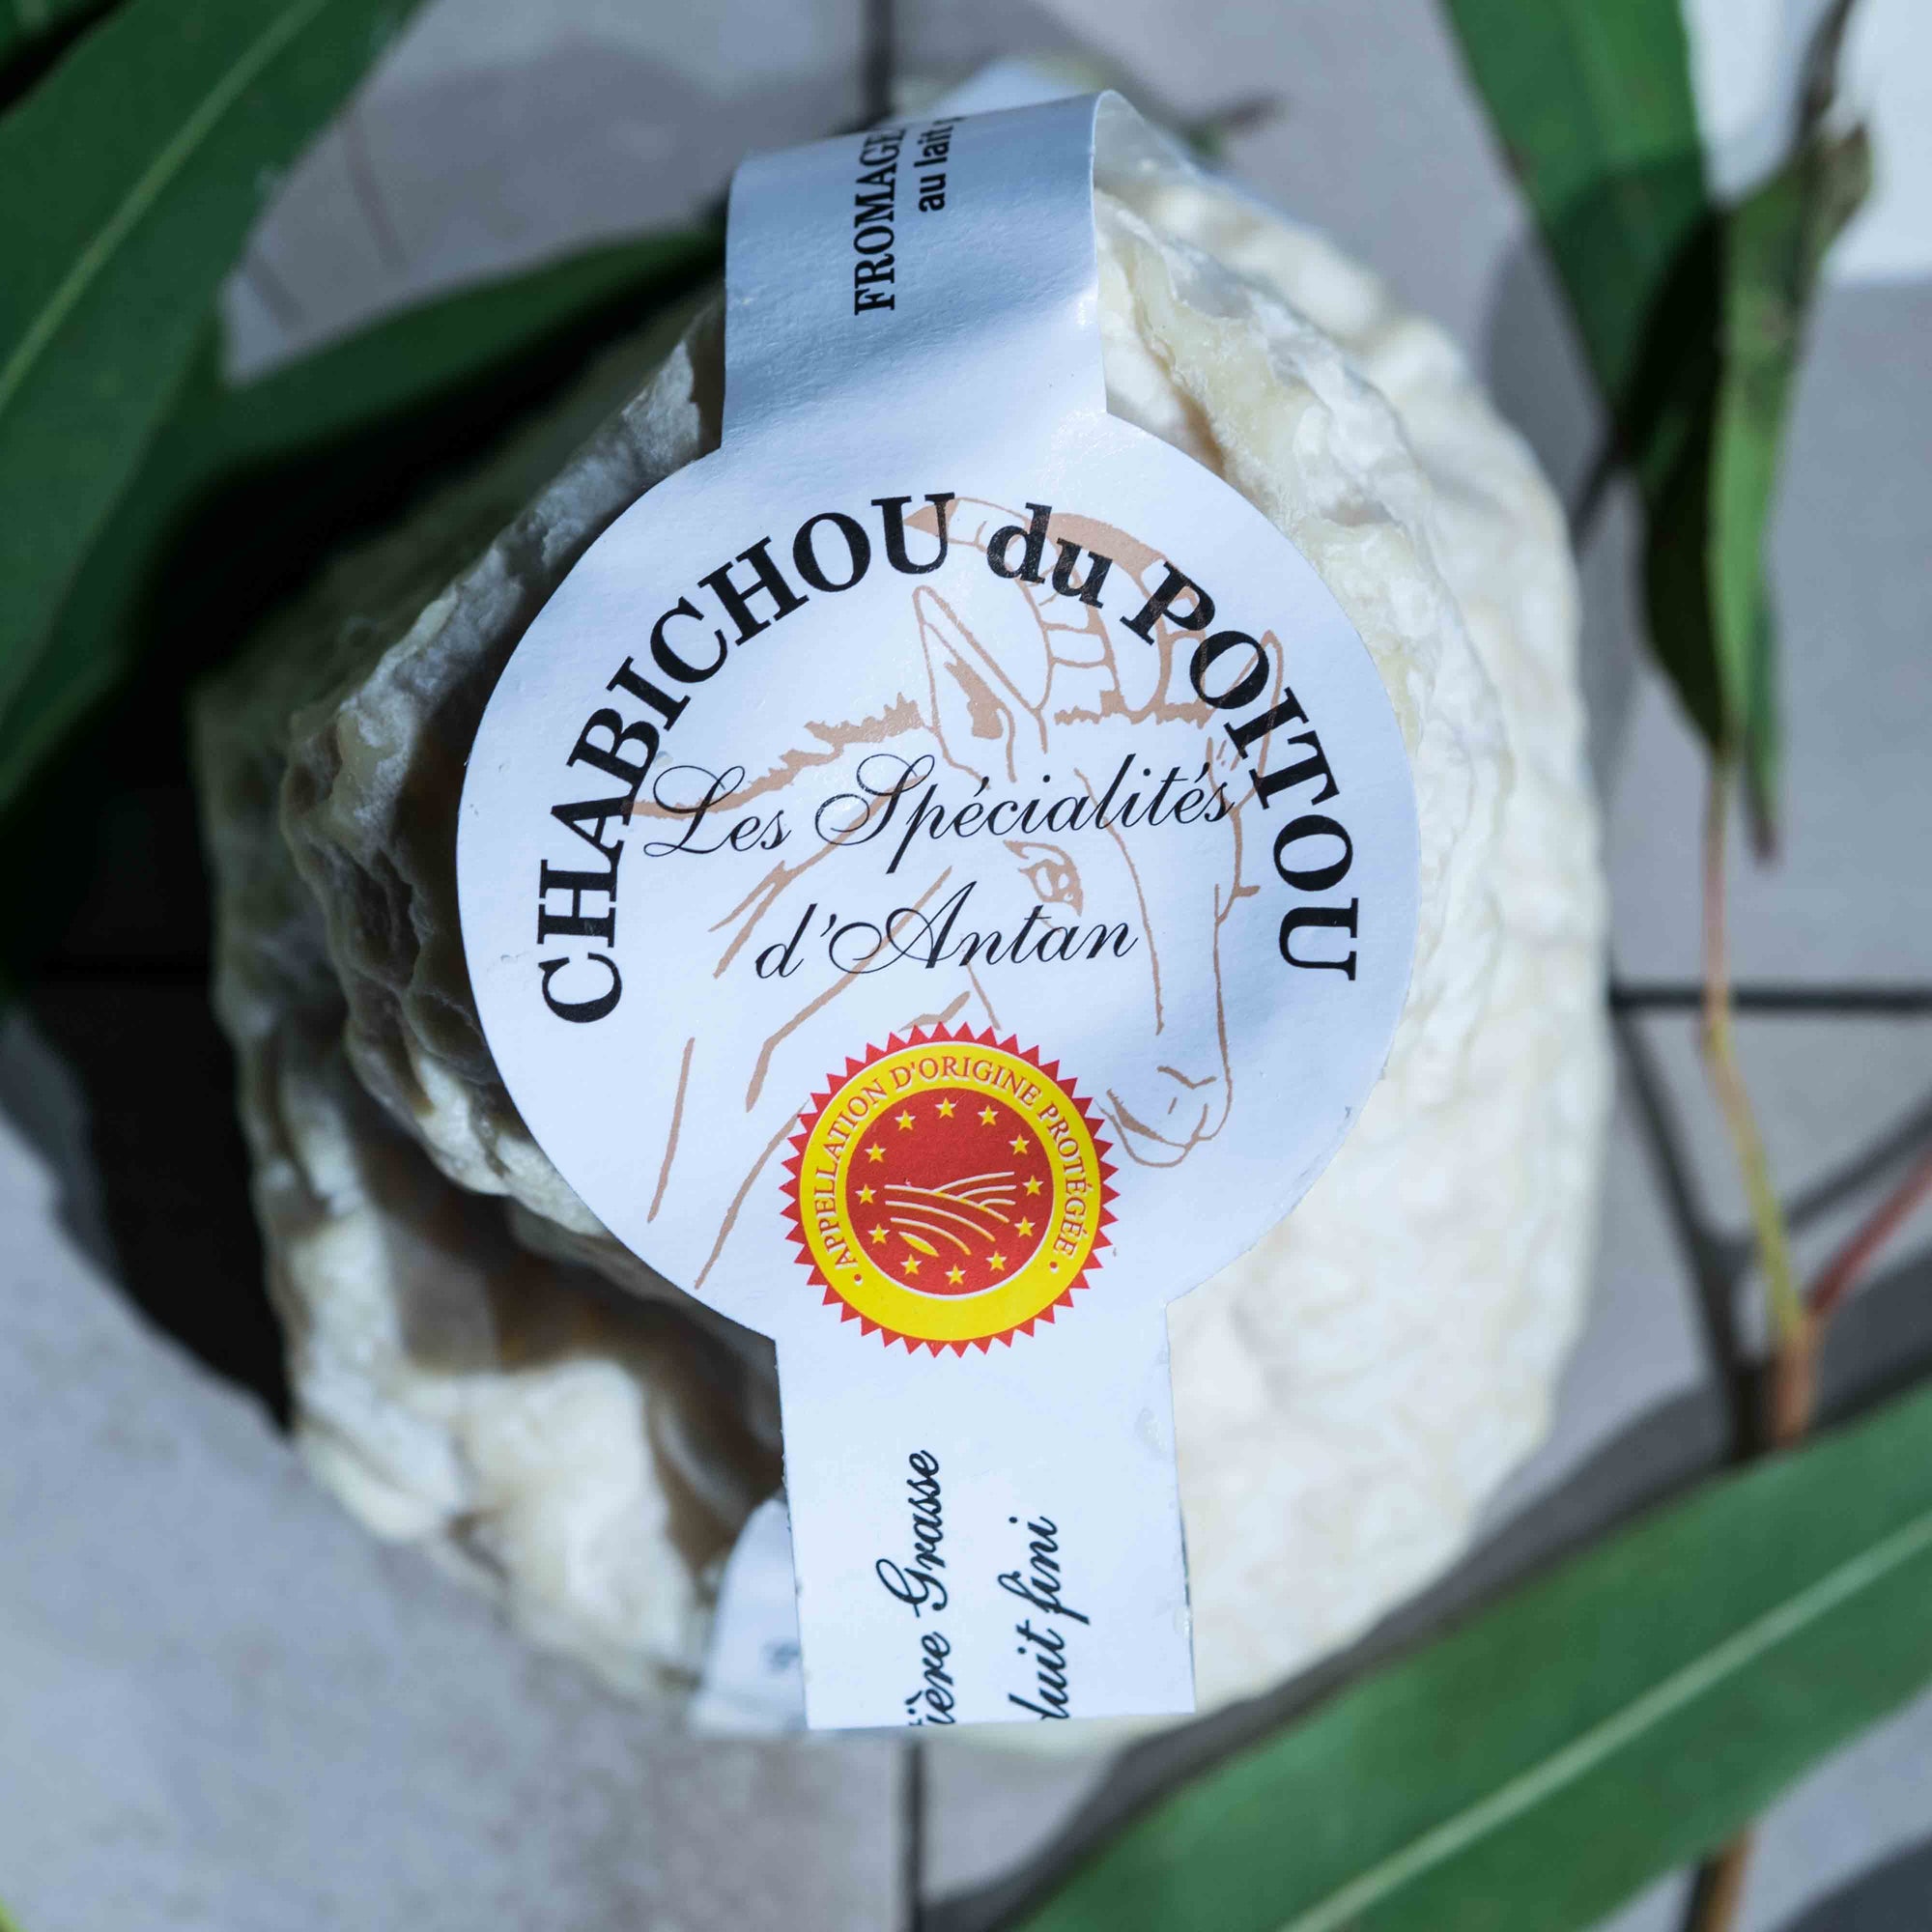 Chabichou - Smooth soft white French style Goat’s Milk Cheese - 150g